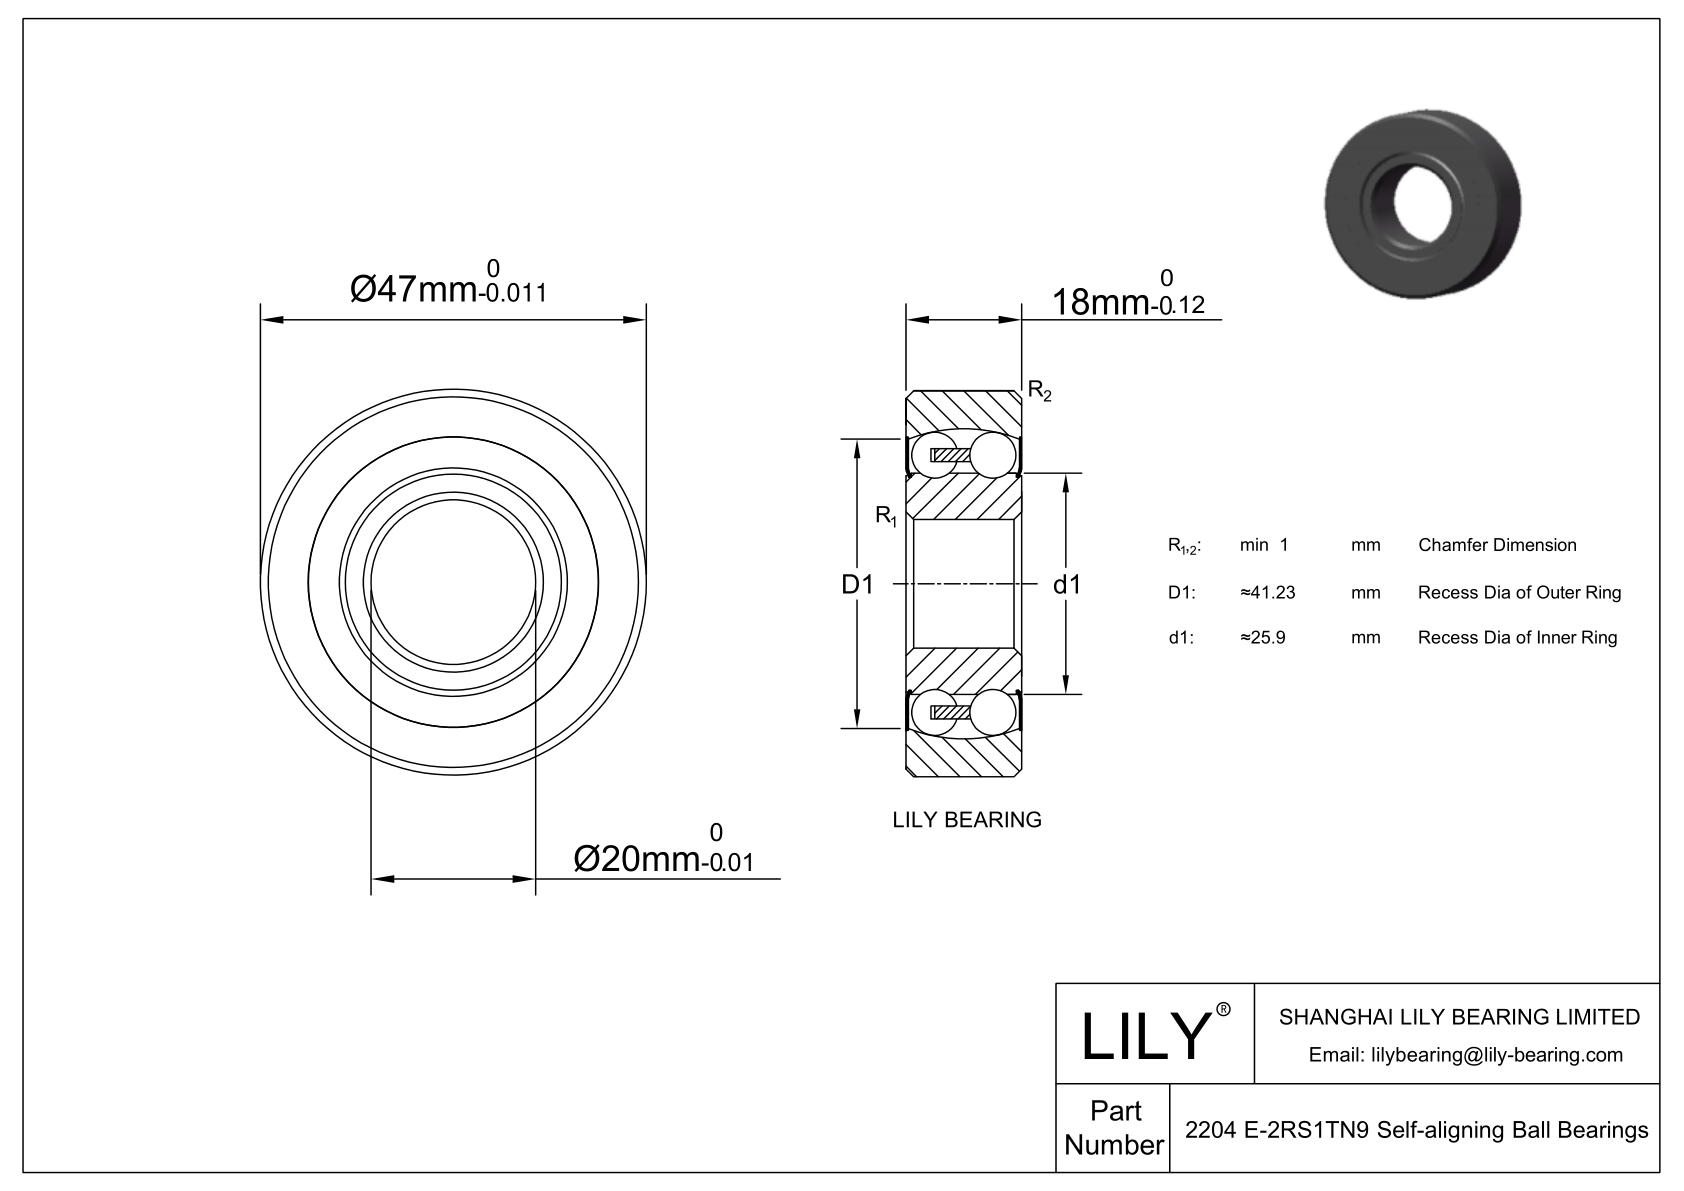 CE2204 E-SIPP Silicon Nitride Self Aligning Ball Bearings cad drawing